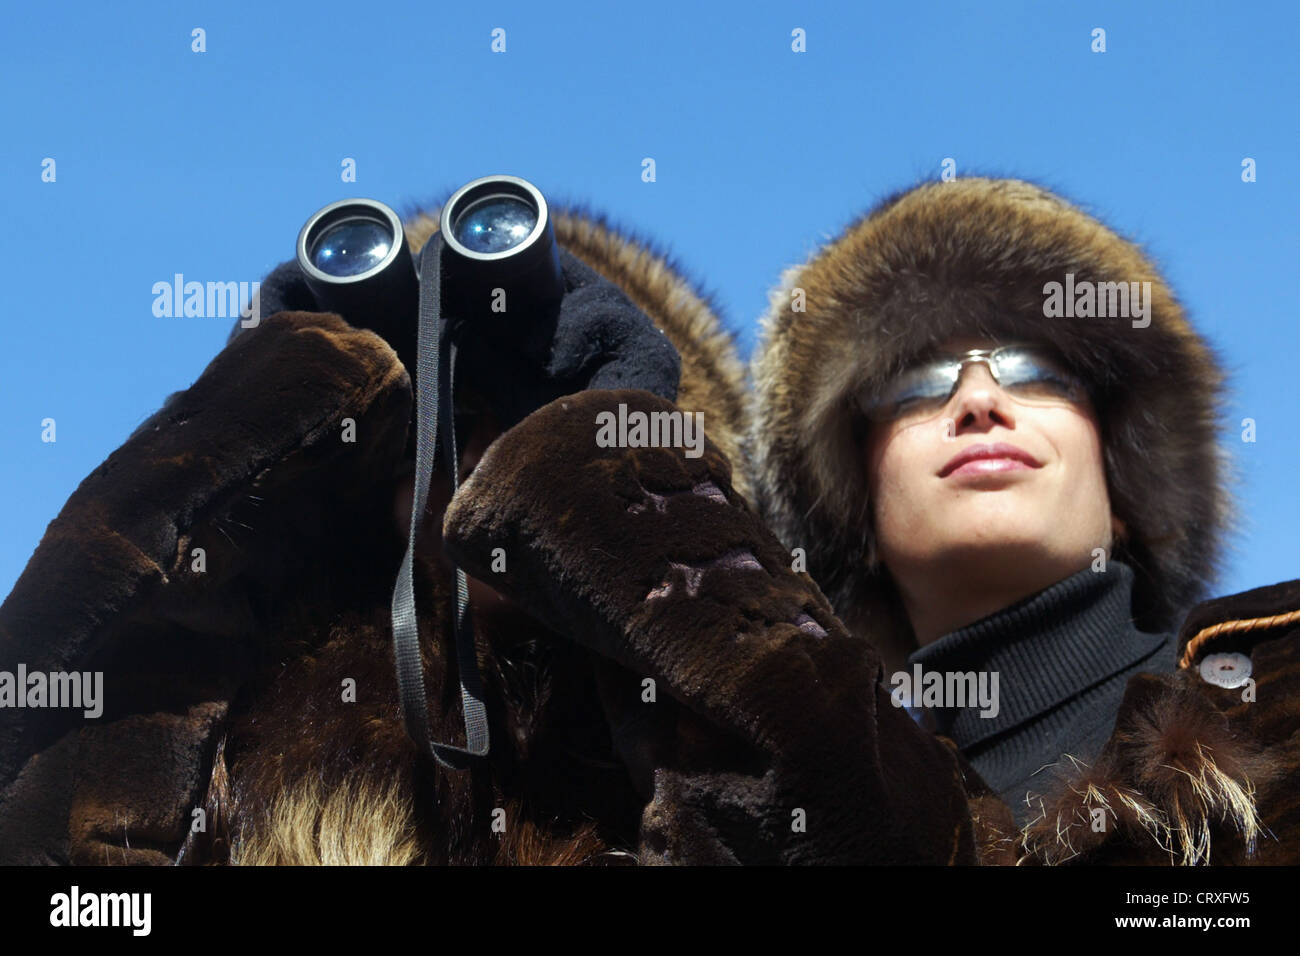 Two women with binoculars at the races Stock Photo